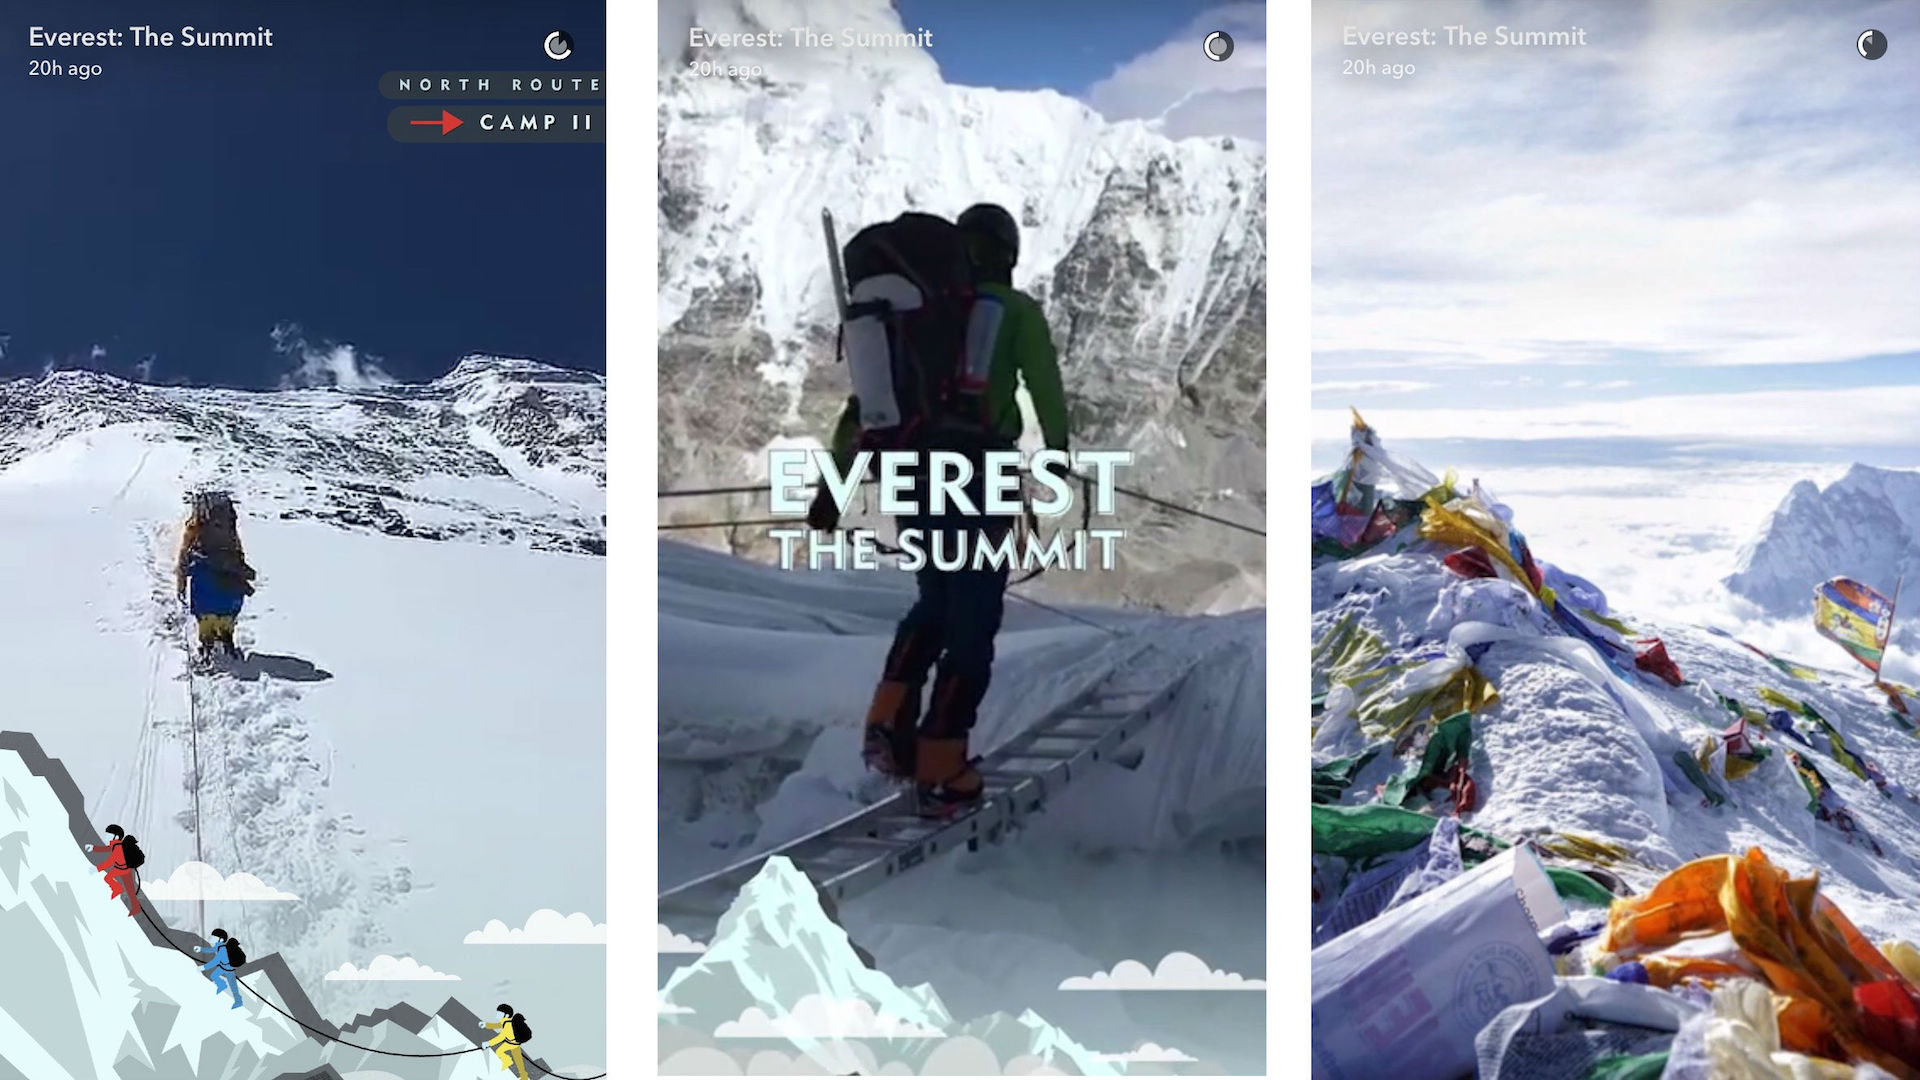 Snapchat's Everest Live Story used pre-recorded footage that the company's curation team polished in production.